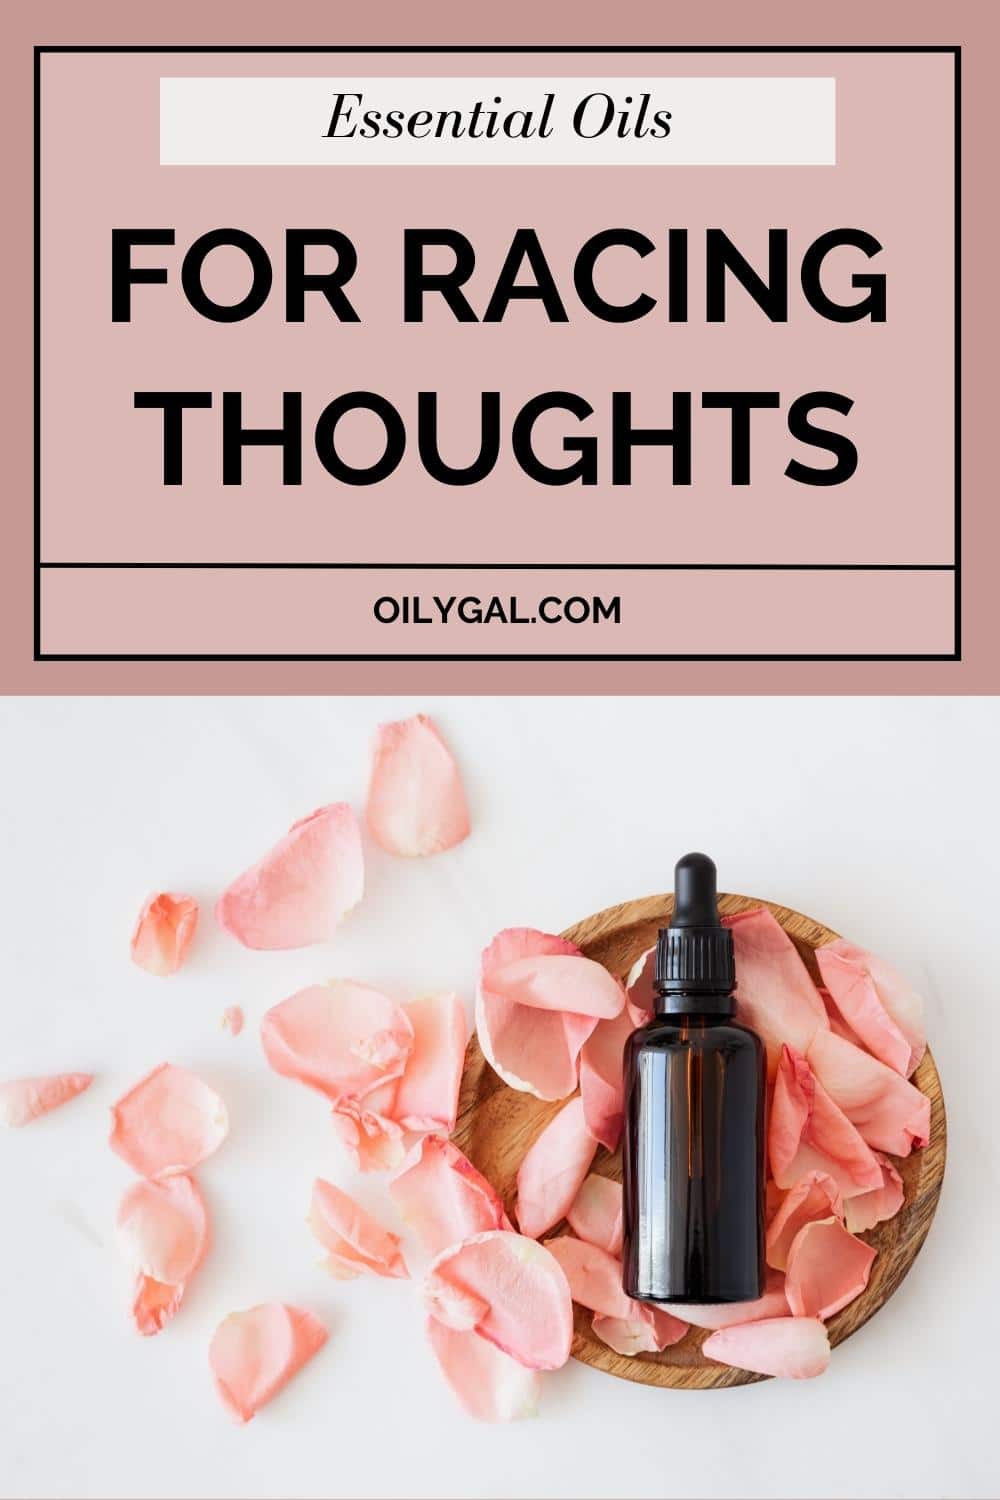 Essential Oils for Racing Thoughts